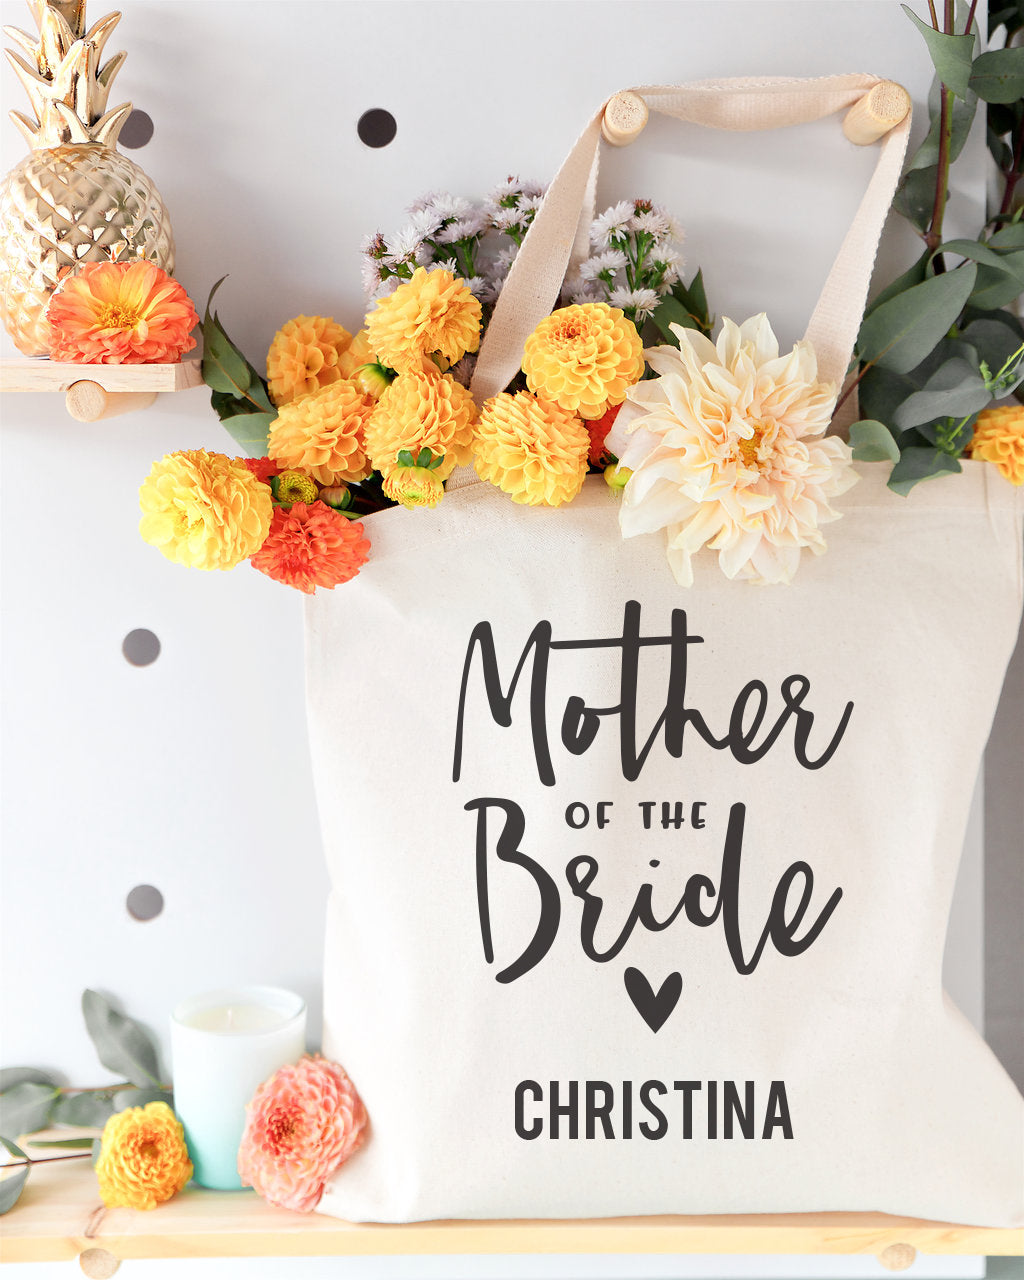 Mother of the Bride Personalized Wedding Cotton Canvas Tote Bag by The Cotton & Canvas Co.